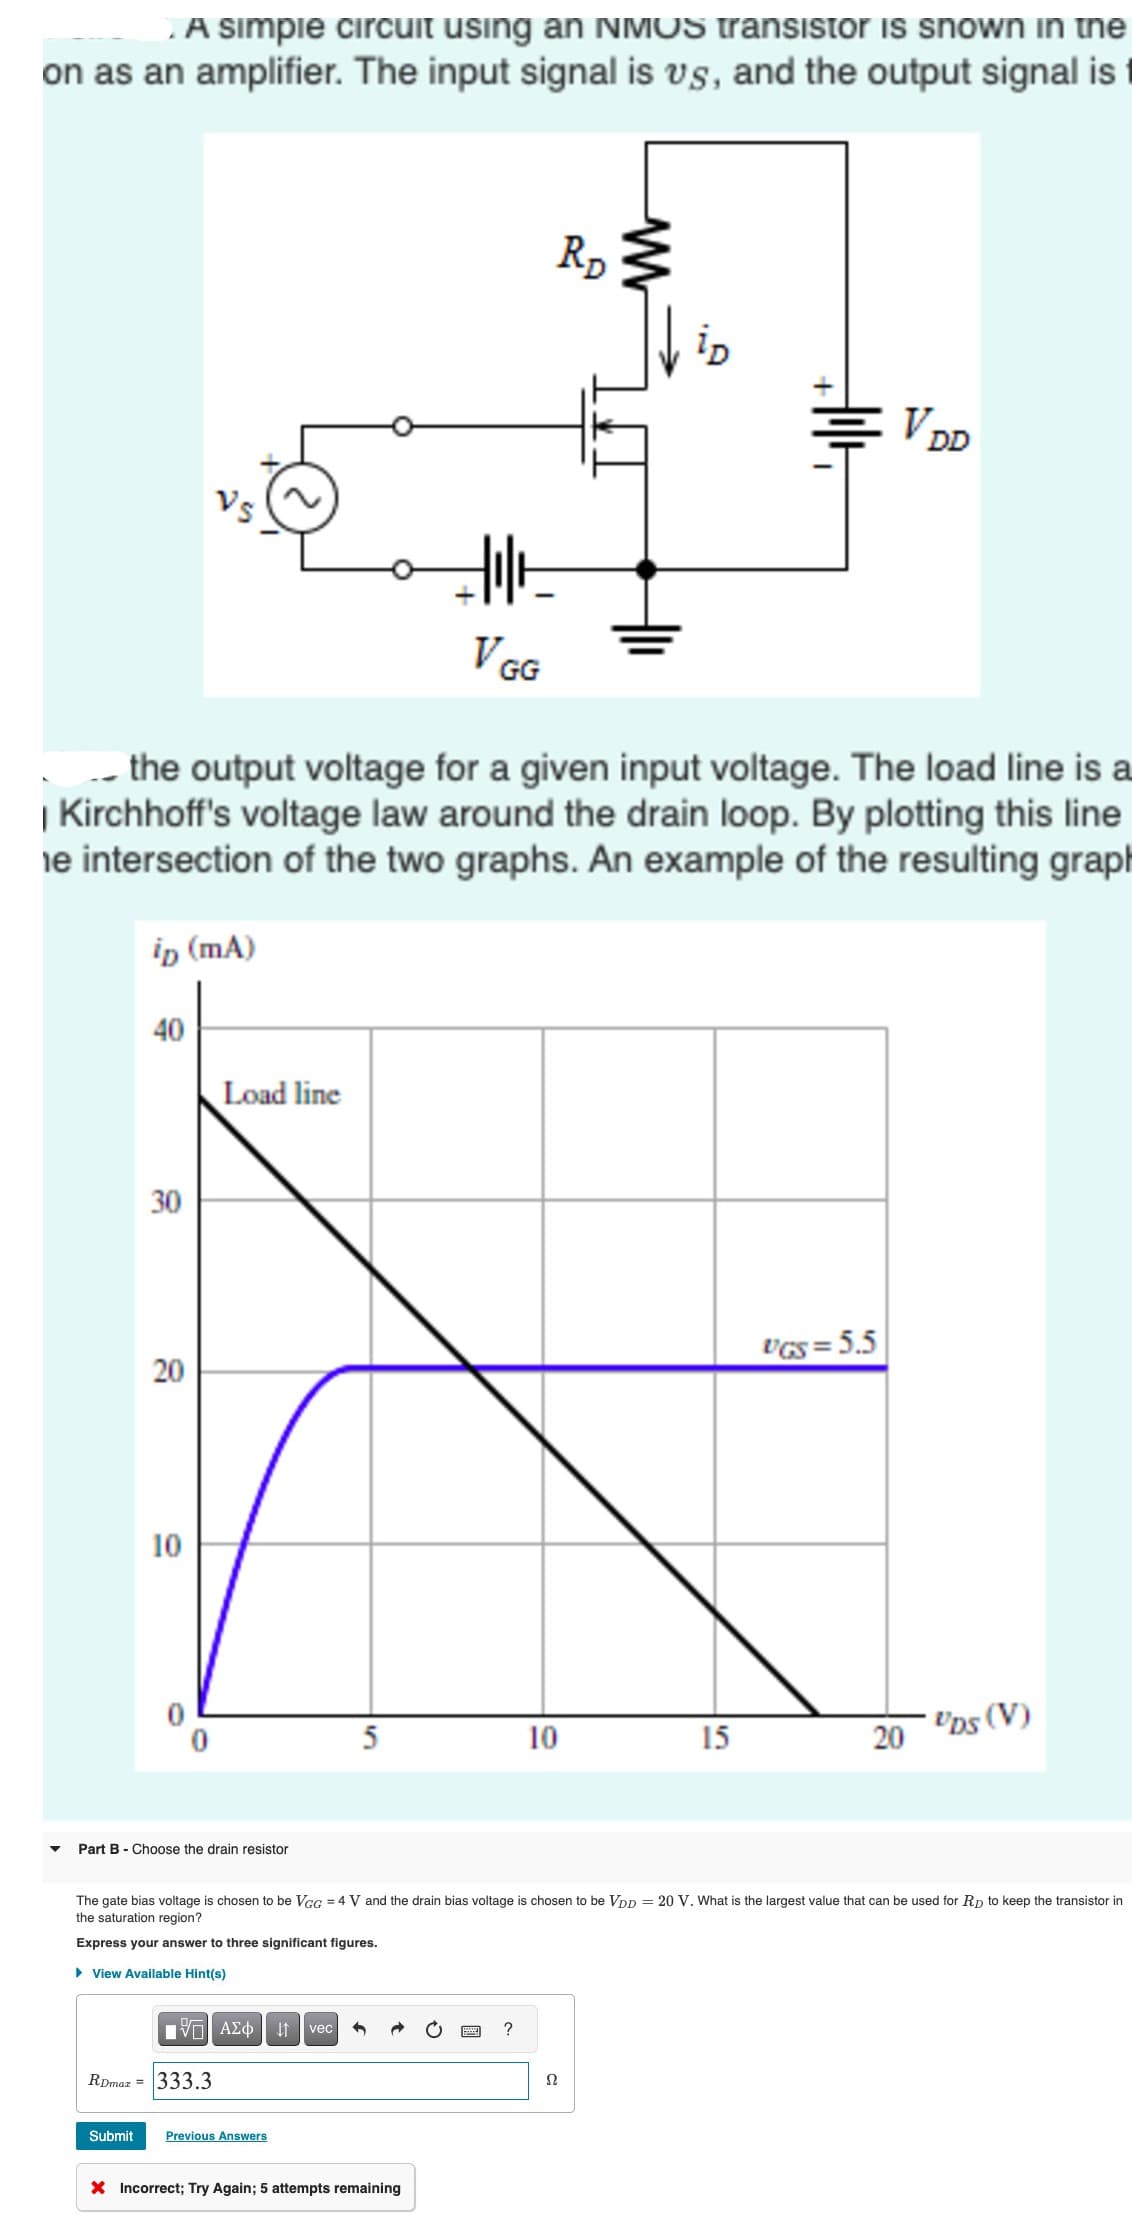 A simple circuit using an NMOS transistor is snown in the
on as an amplifier. The input signal is vs, and the output signal is
ip (mA)
40
RDmaz =
30
20
the output voltage for a given input voltage. The load line is a
| Kirchhoff's voltage law around the drain loop. By plotting this line
he intersection of the two graphs. An example of the resulting graph
10
Load line
Part B - Choose the drain resistor
ΠΠ ΑΣΦ
333.3
5
Submit Previous Answers
Hilt
↓↑ vec 3
V GG
X Incorrect; Try Again; 5 attempts remaining
10
RD
W
Ω
Holt
15
The gate bias voltage is chosen to be VGG = 4 V and the drain bias voltage is chosen to be VDD = 20 V. What is the largest value that can be used for RD to keep the transistor in
the saturation region?
Express your answer to three significant figures.
▸ View Available Hint(s)
VDD
UGS = 5.5
20
UDS (V)